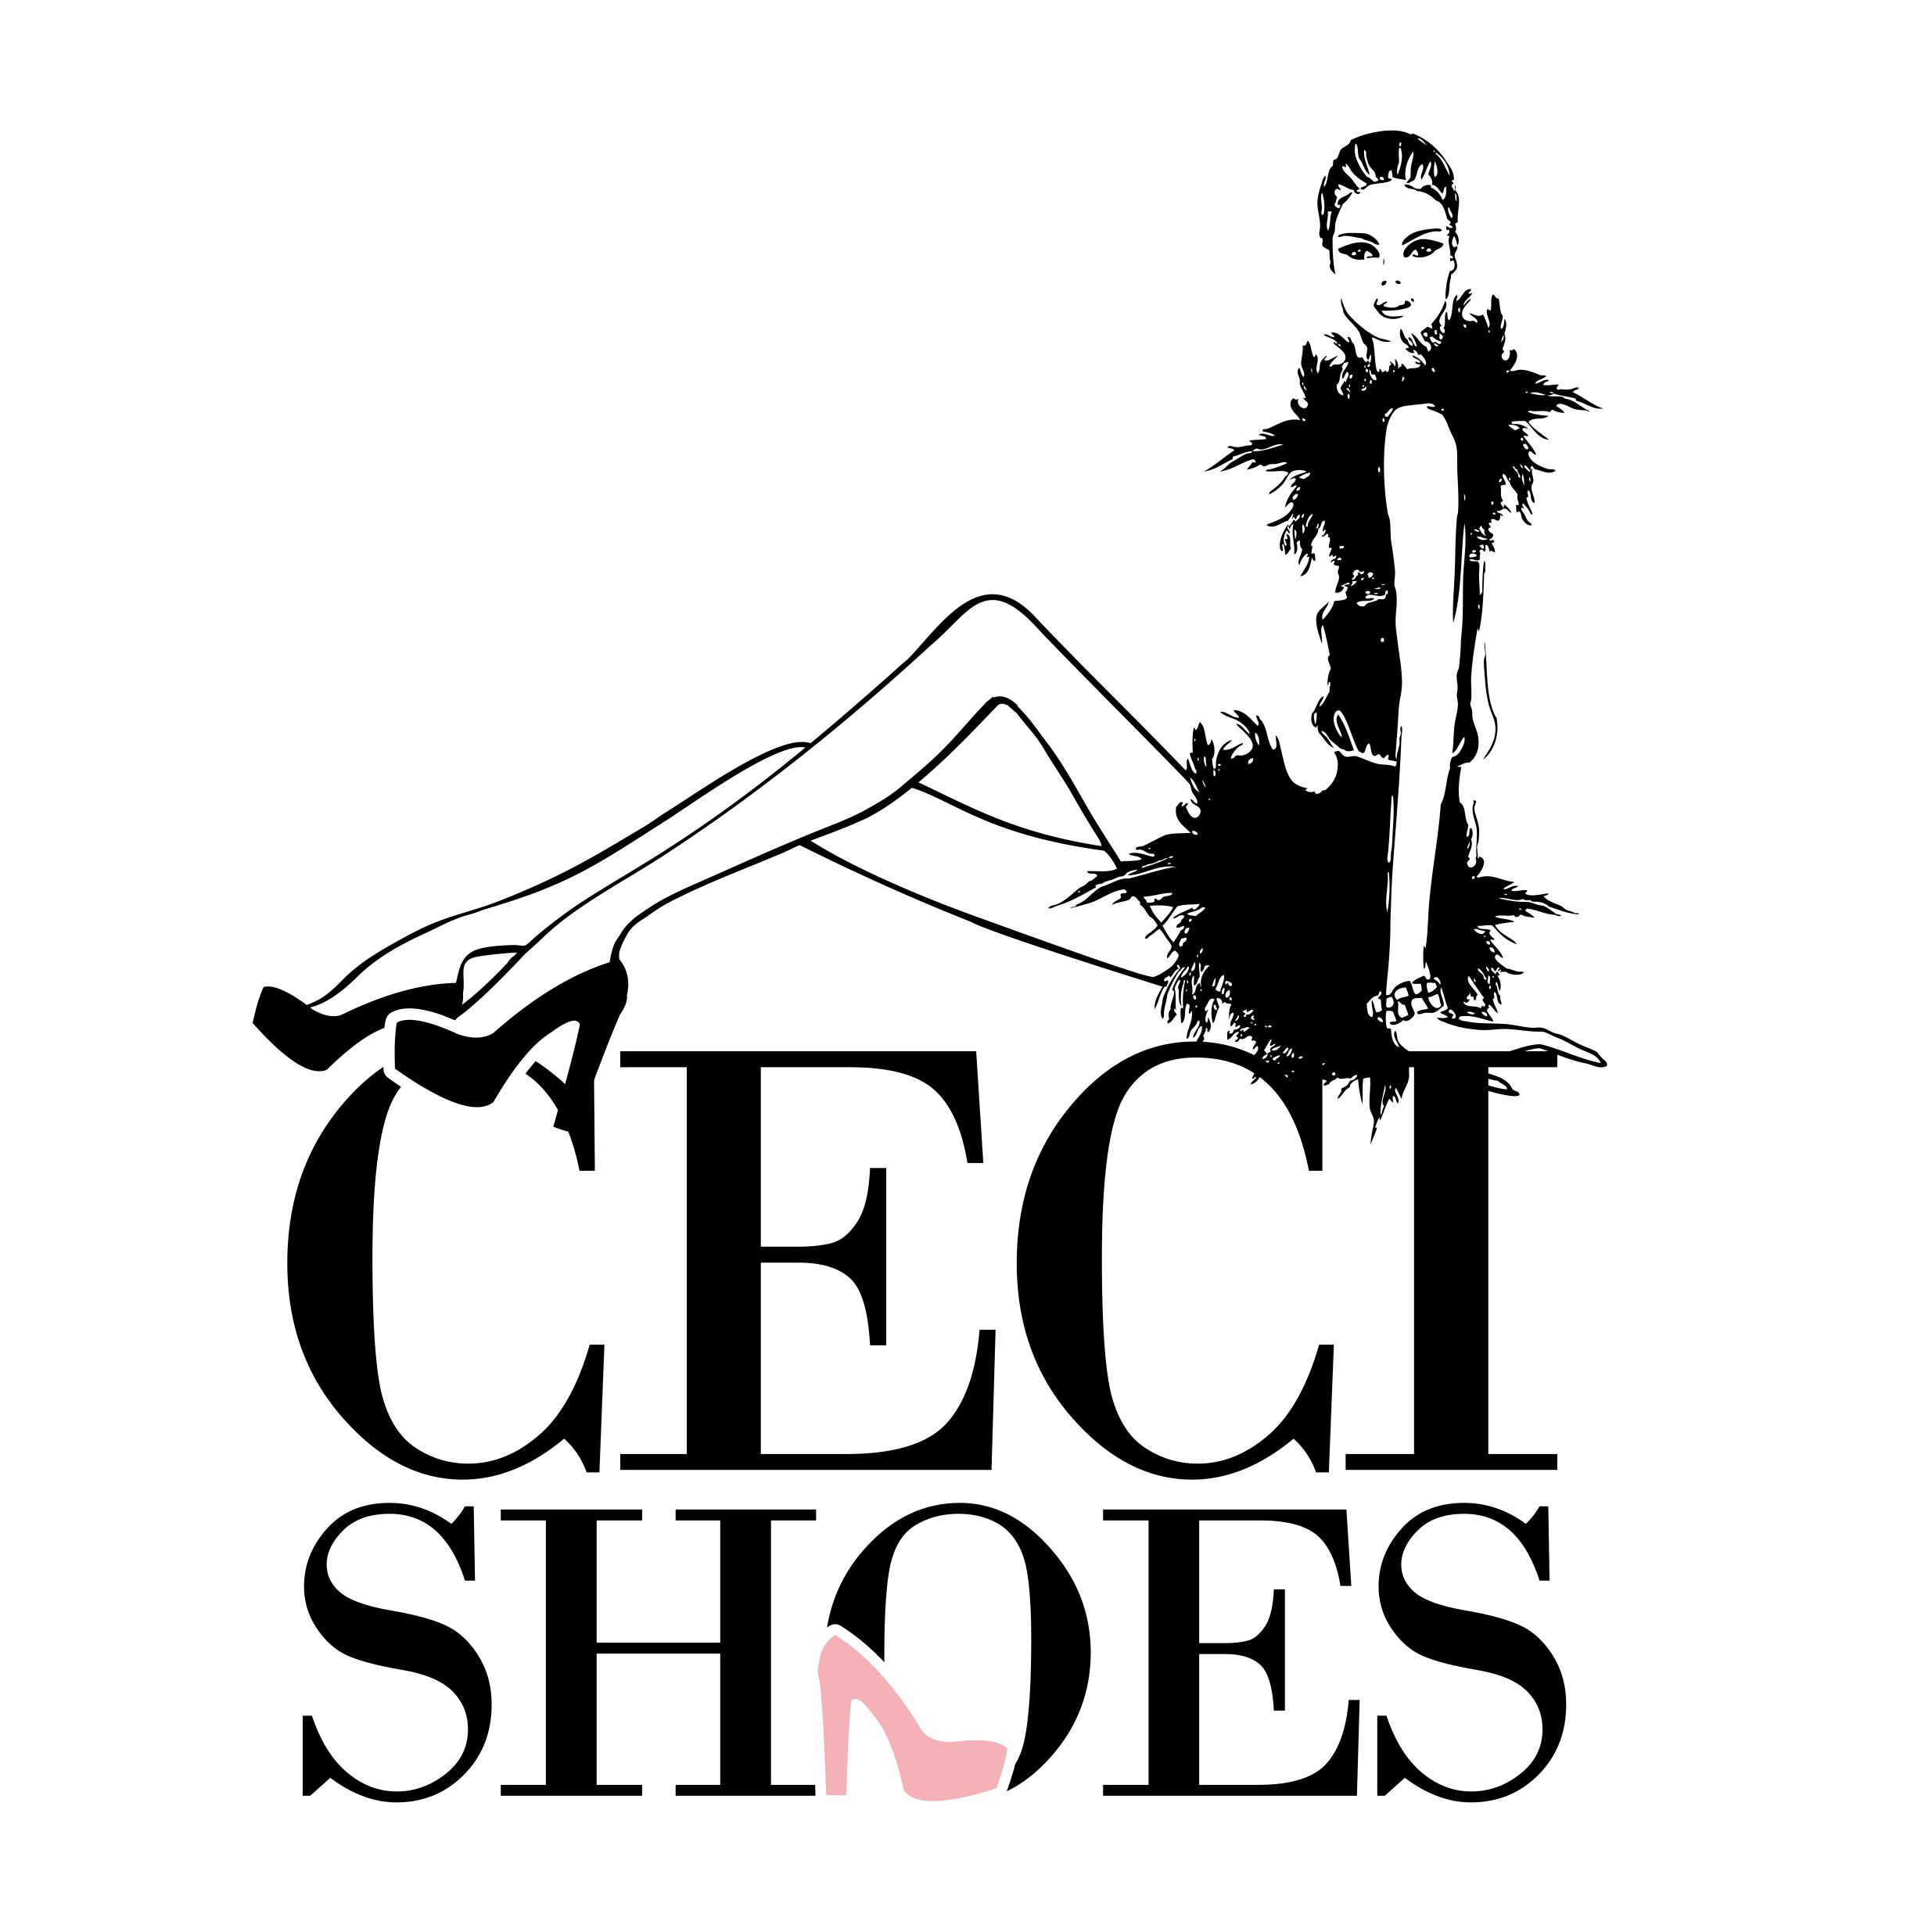 CeciShoes